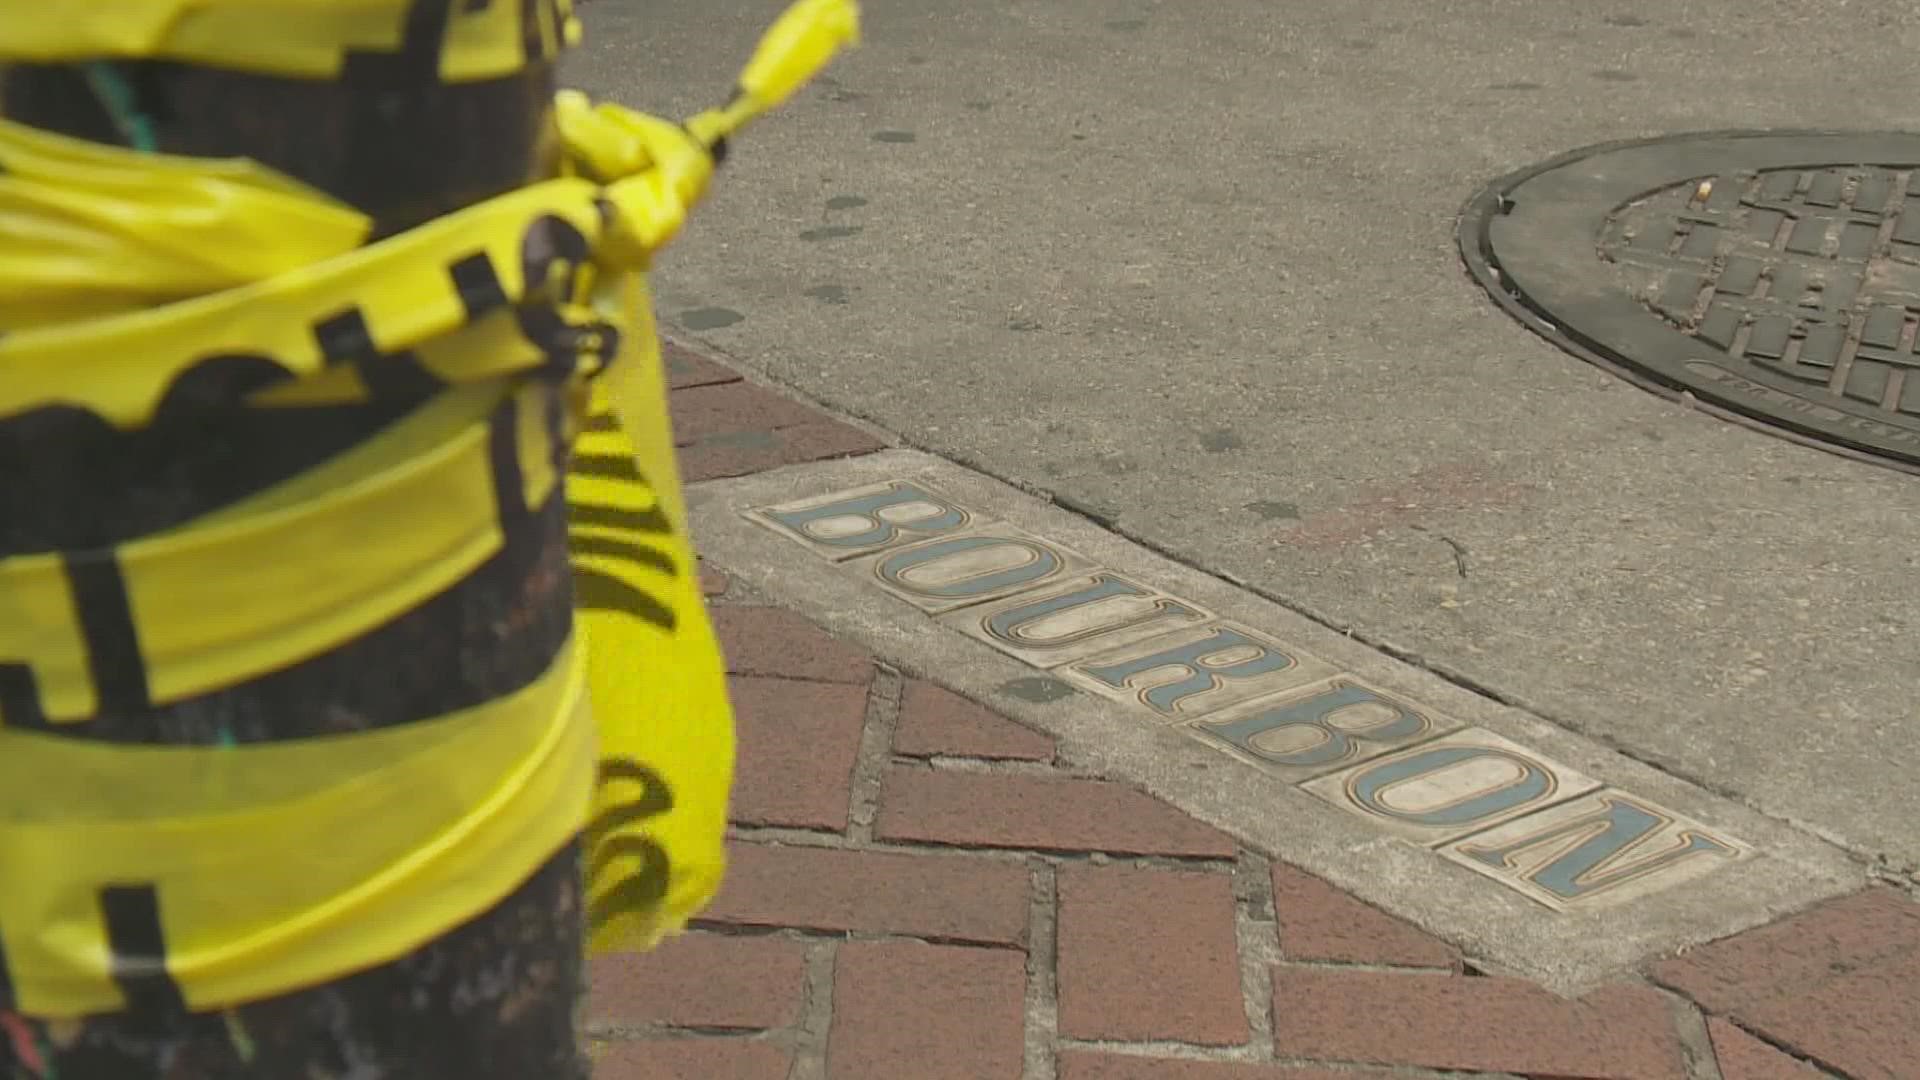 People who work and live in the French Quarter say crime is out of control.